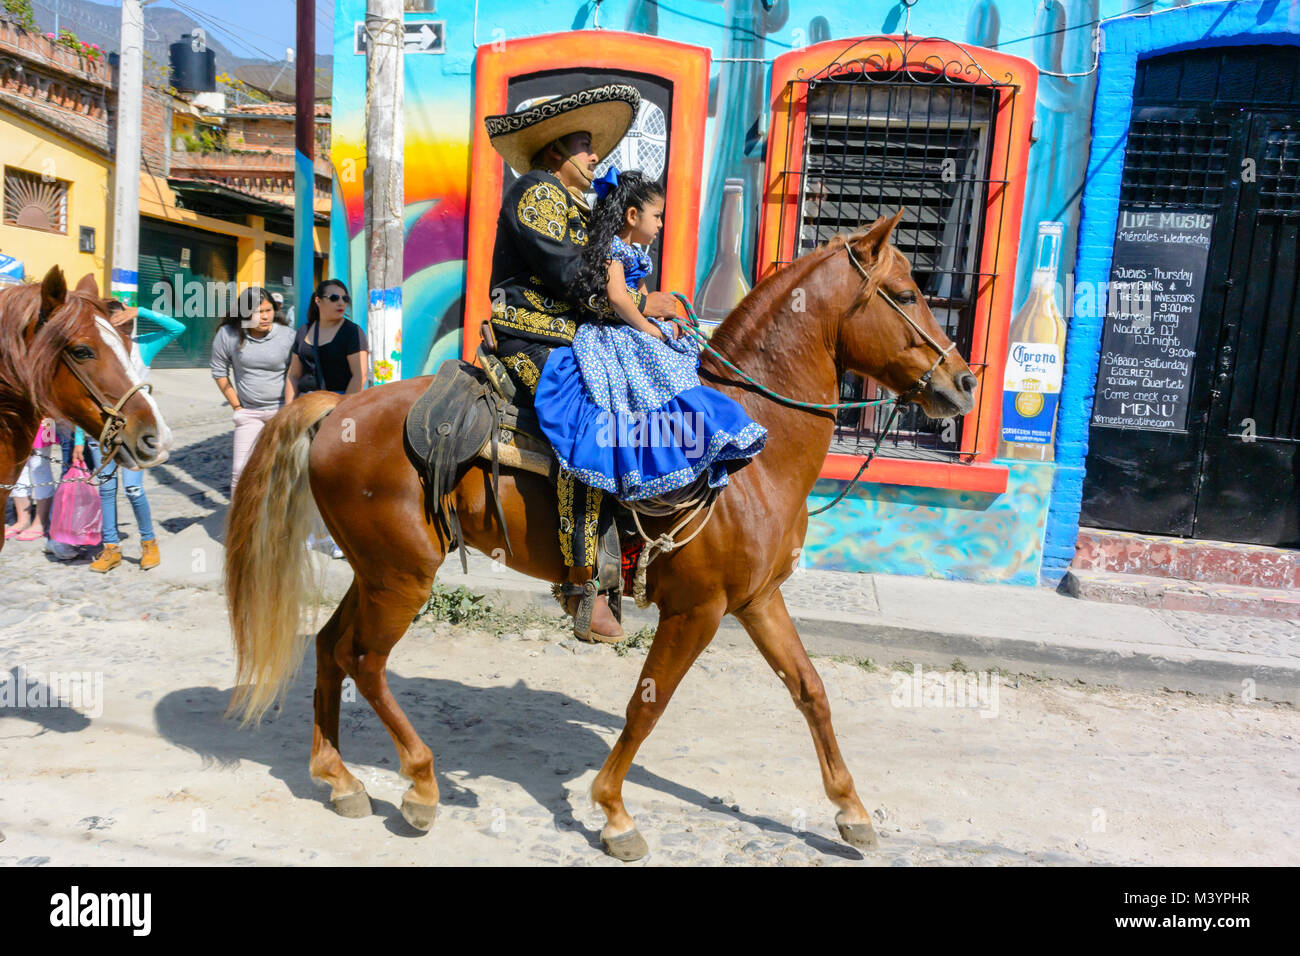 Ajijic, Jalisco State, Mexico. 13 February, 2018. Mardi Gras Festival and Parade, Mexican woman and child riding a horse. Peter Llewellyn/Alamy Live News Stock Photo